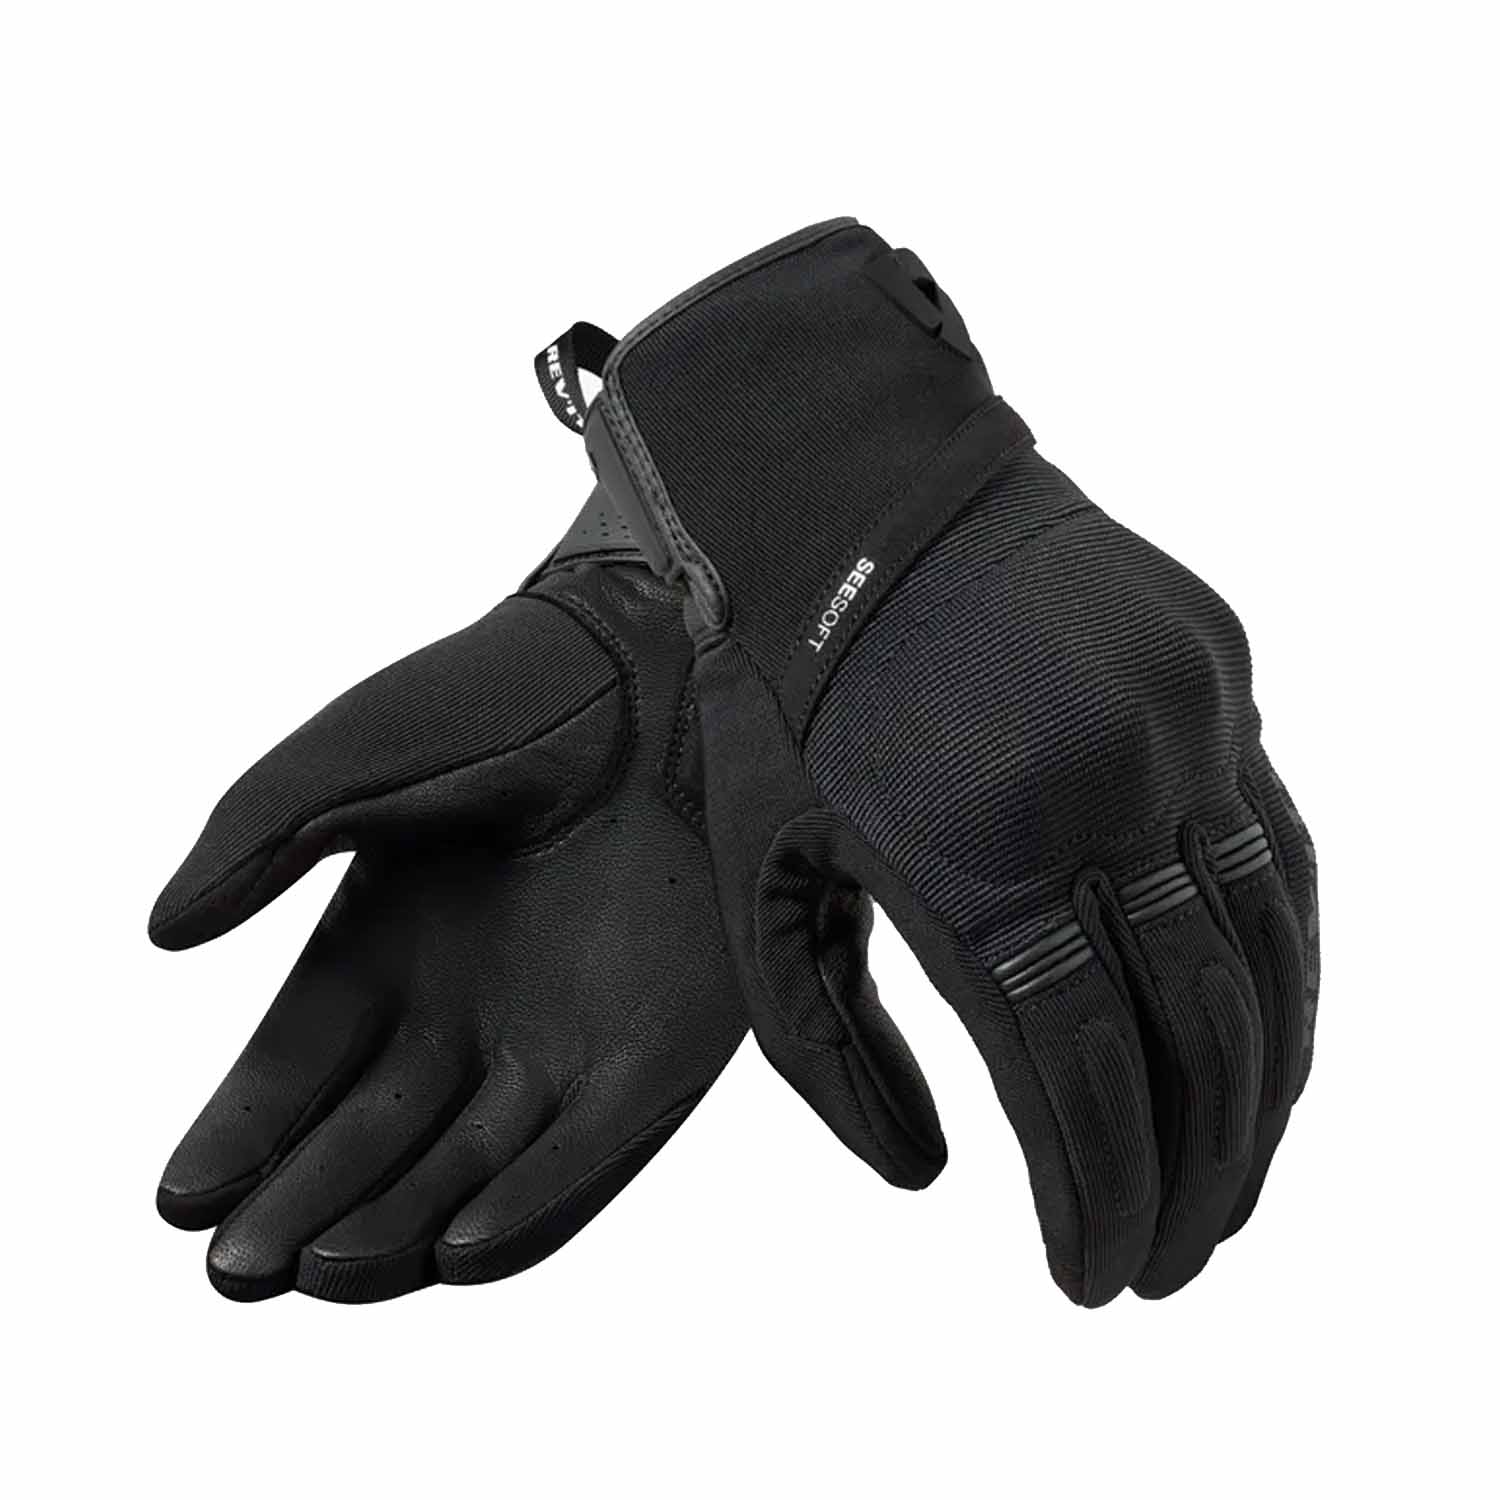 Image of EU REV'IT! Mosca 2 Gloves Black Taille S